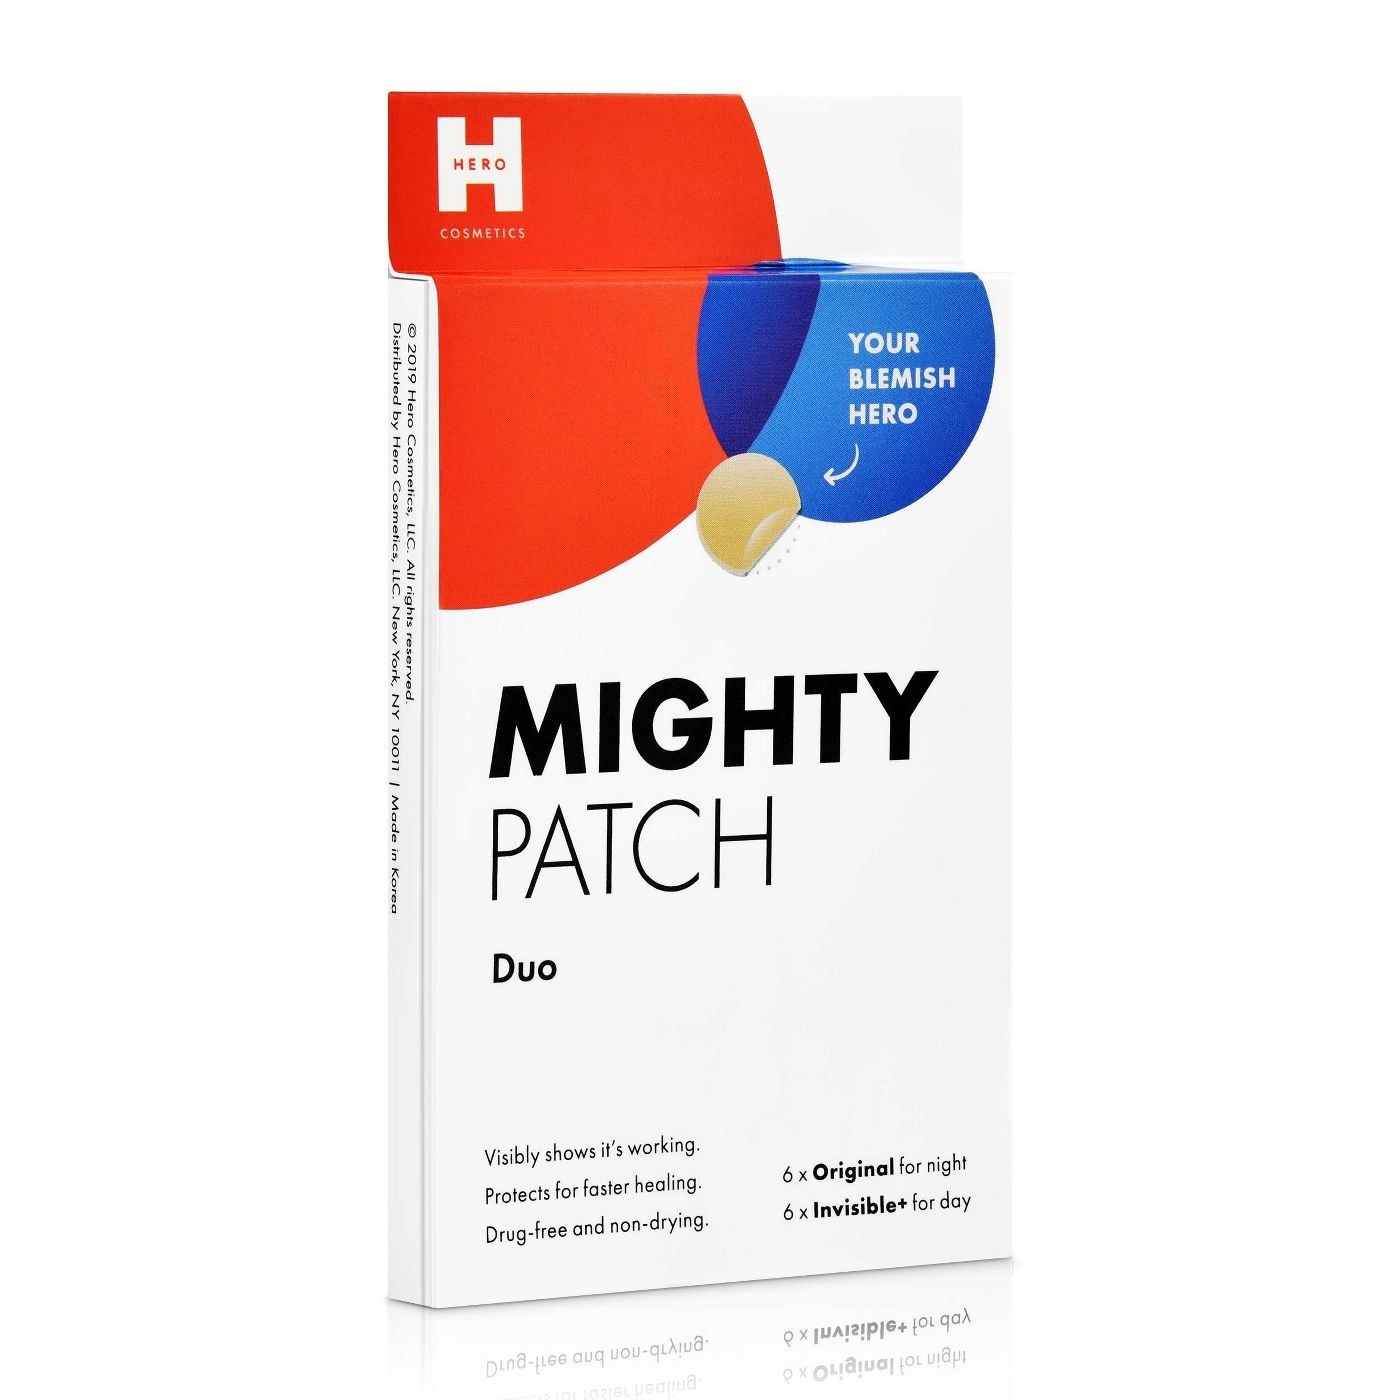 A pack of Mighty Patch blemish patches